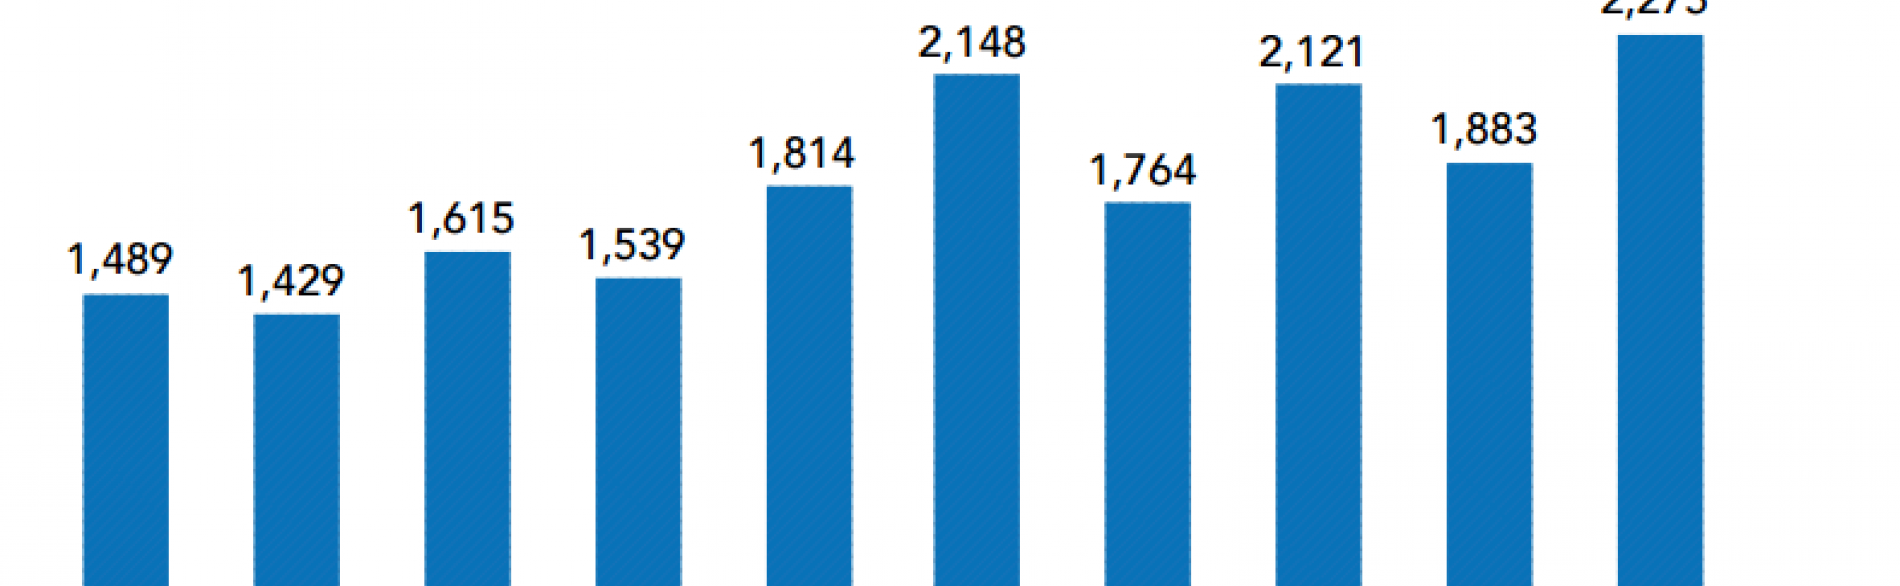 Chart - Total number of patient permit applications per month (Jan-Oct 2015)